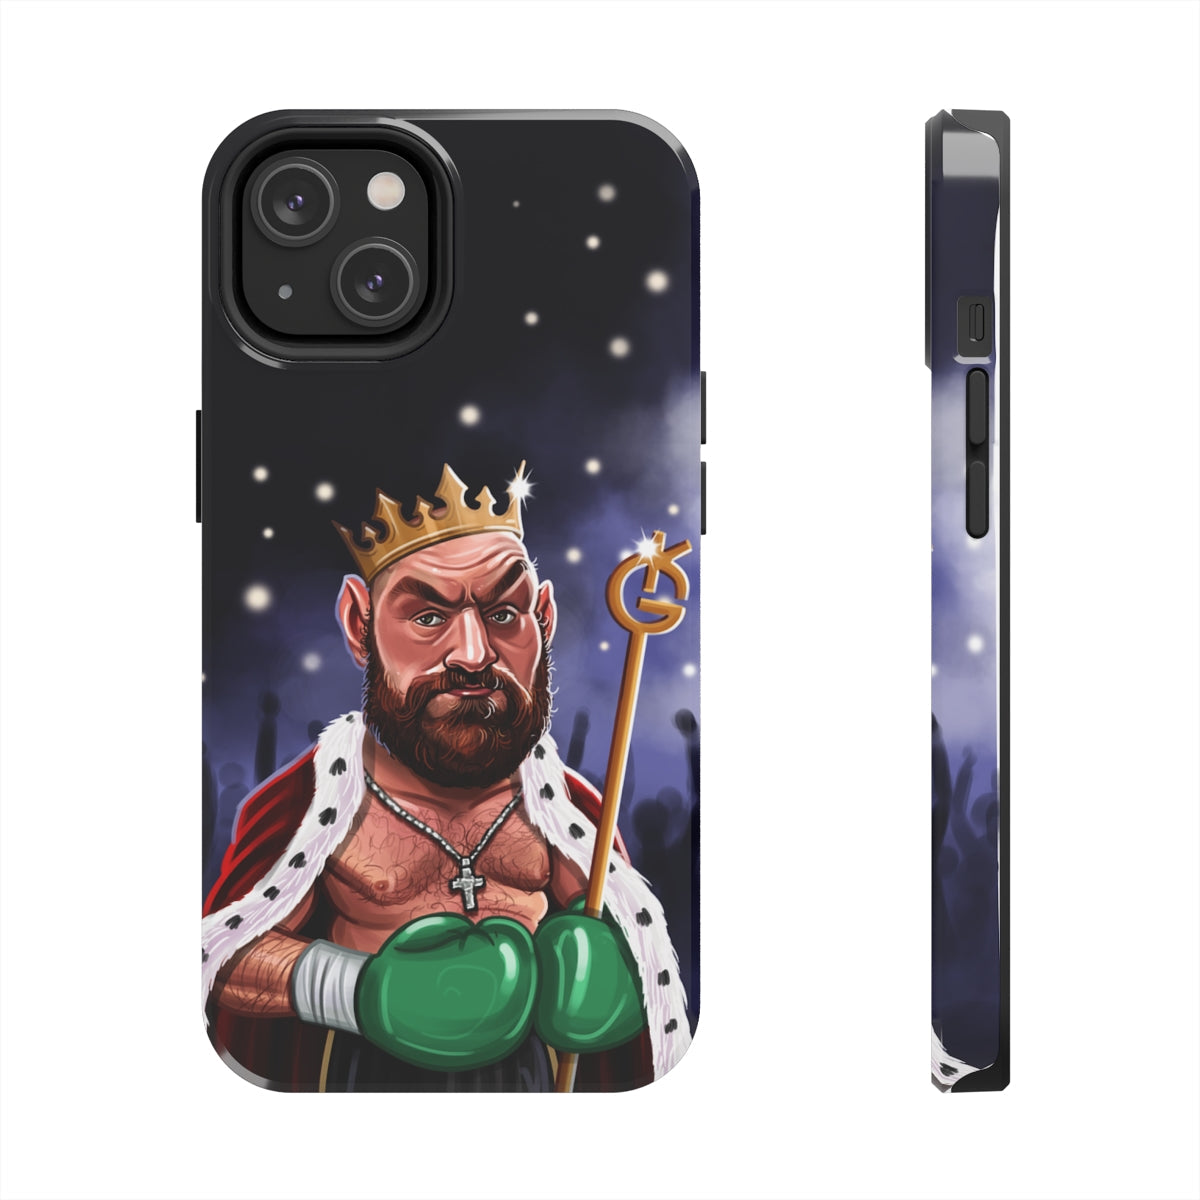 Tyson Fury Tough iPhone 14 Case - The Gypsy King Edition - 